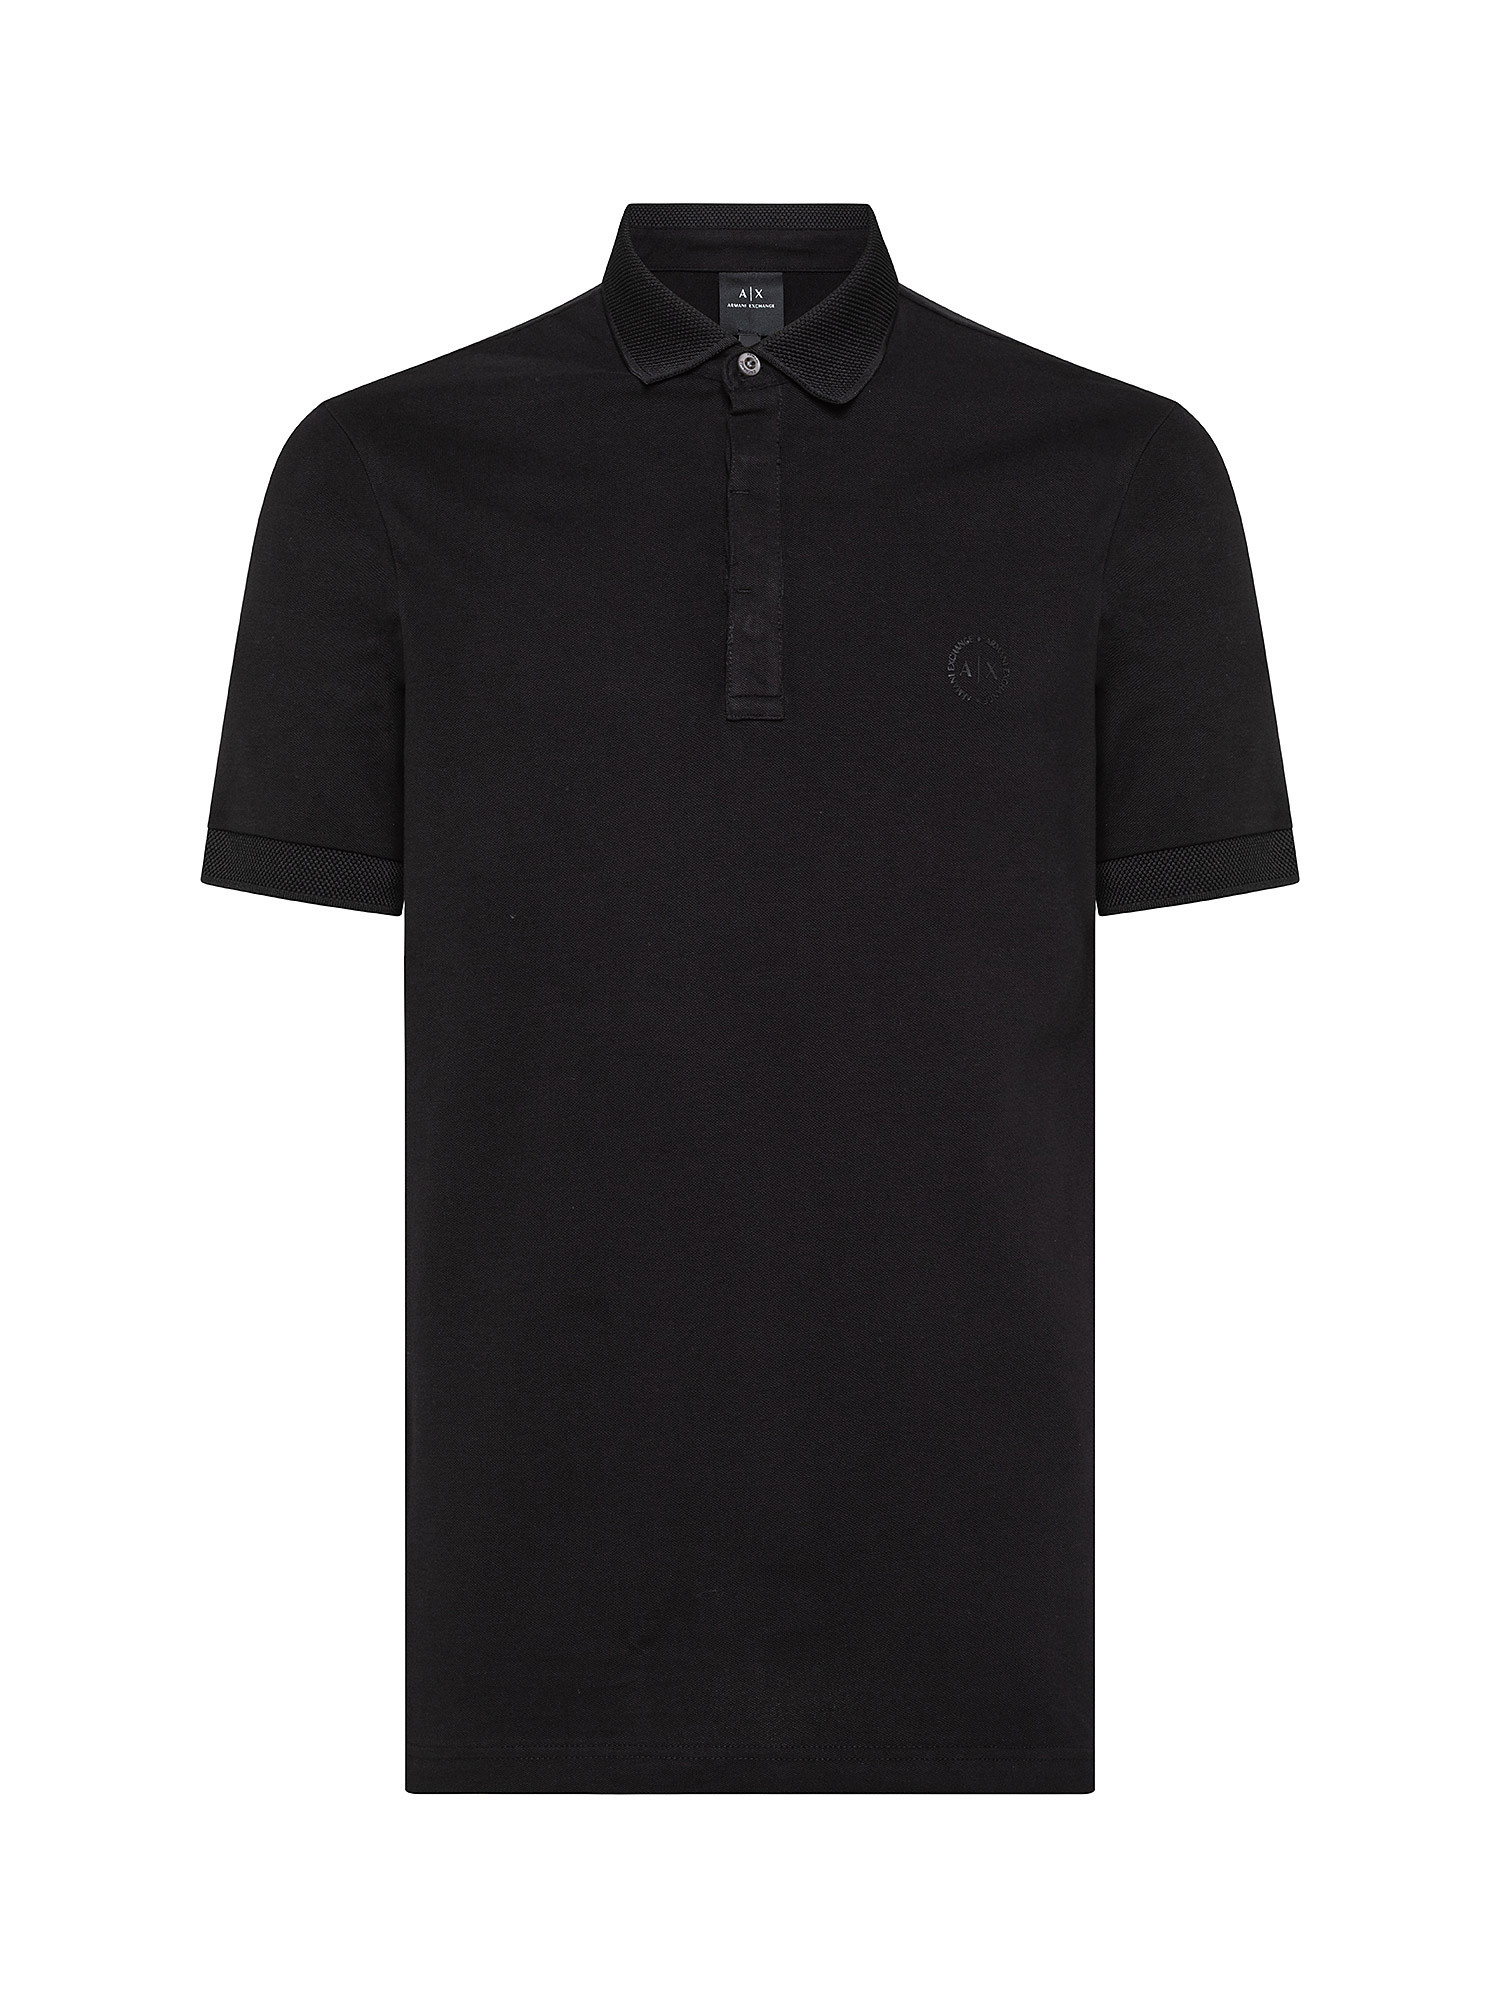 Polo stretch, Nero, large image number 0